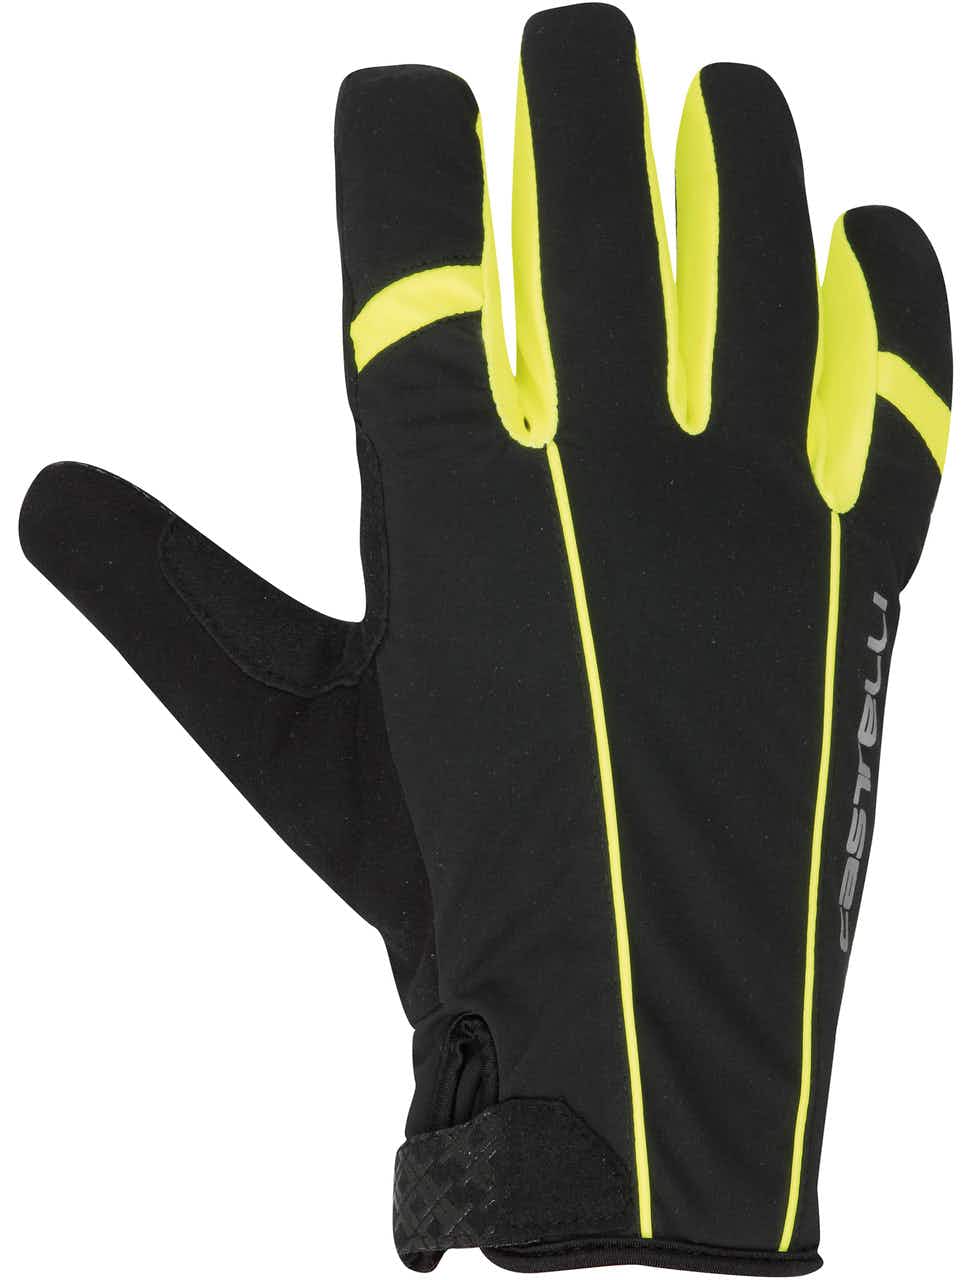 CW 3.1 Gloves Black/Yellow Fluo